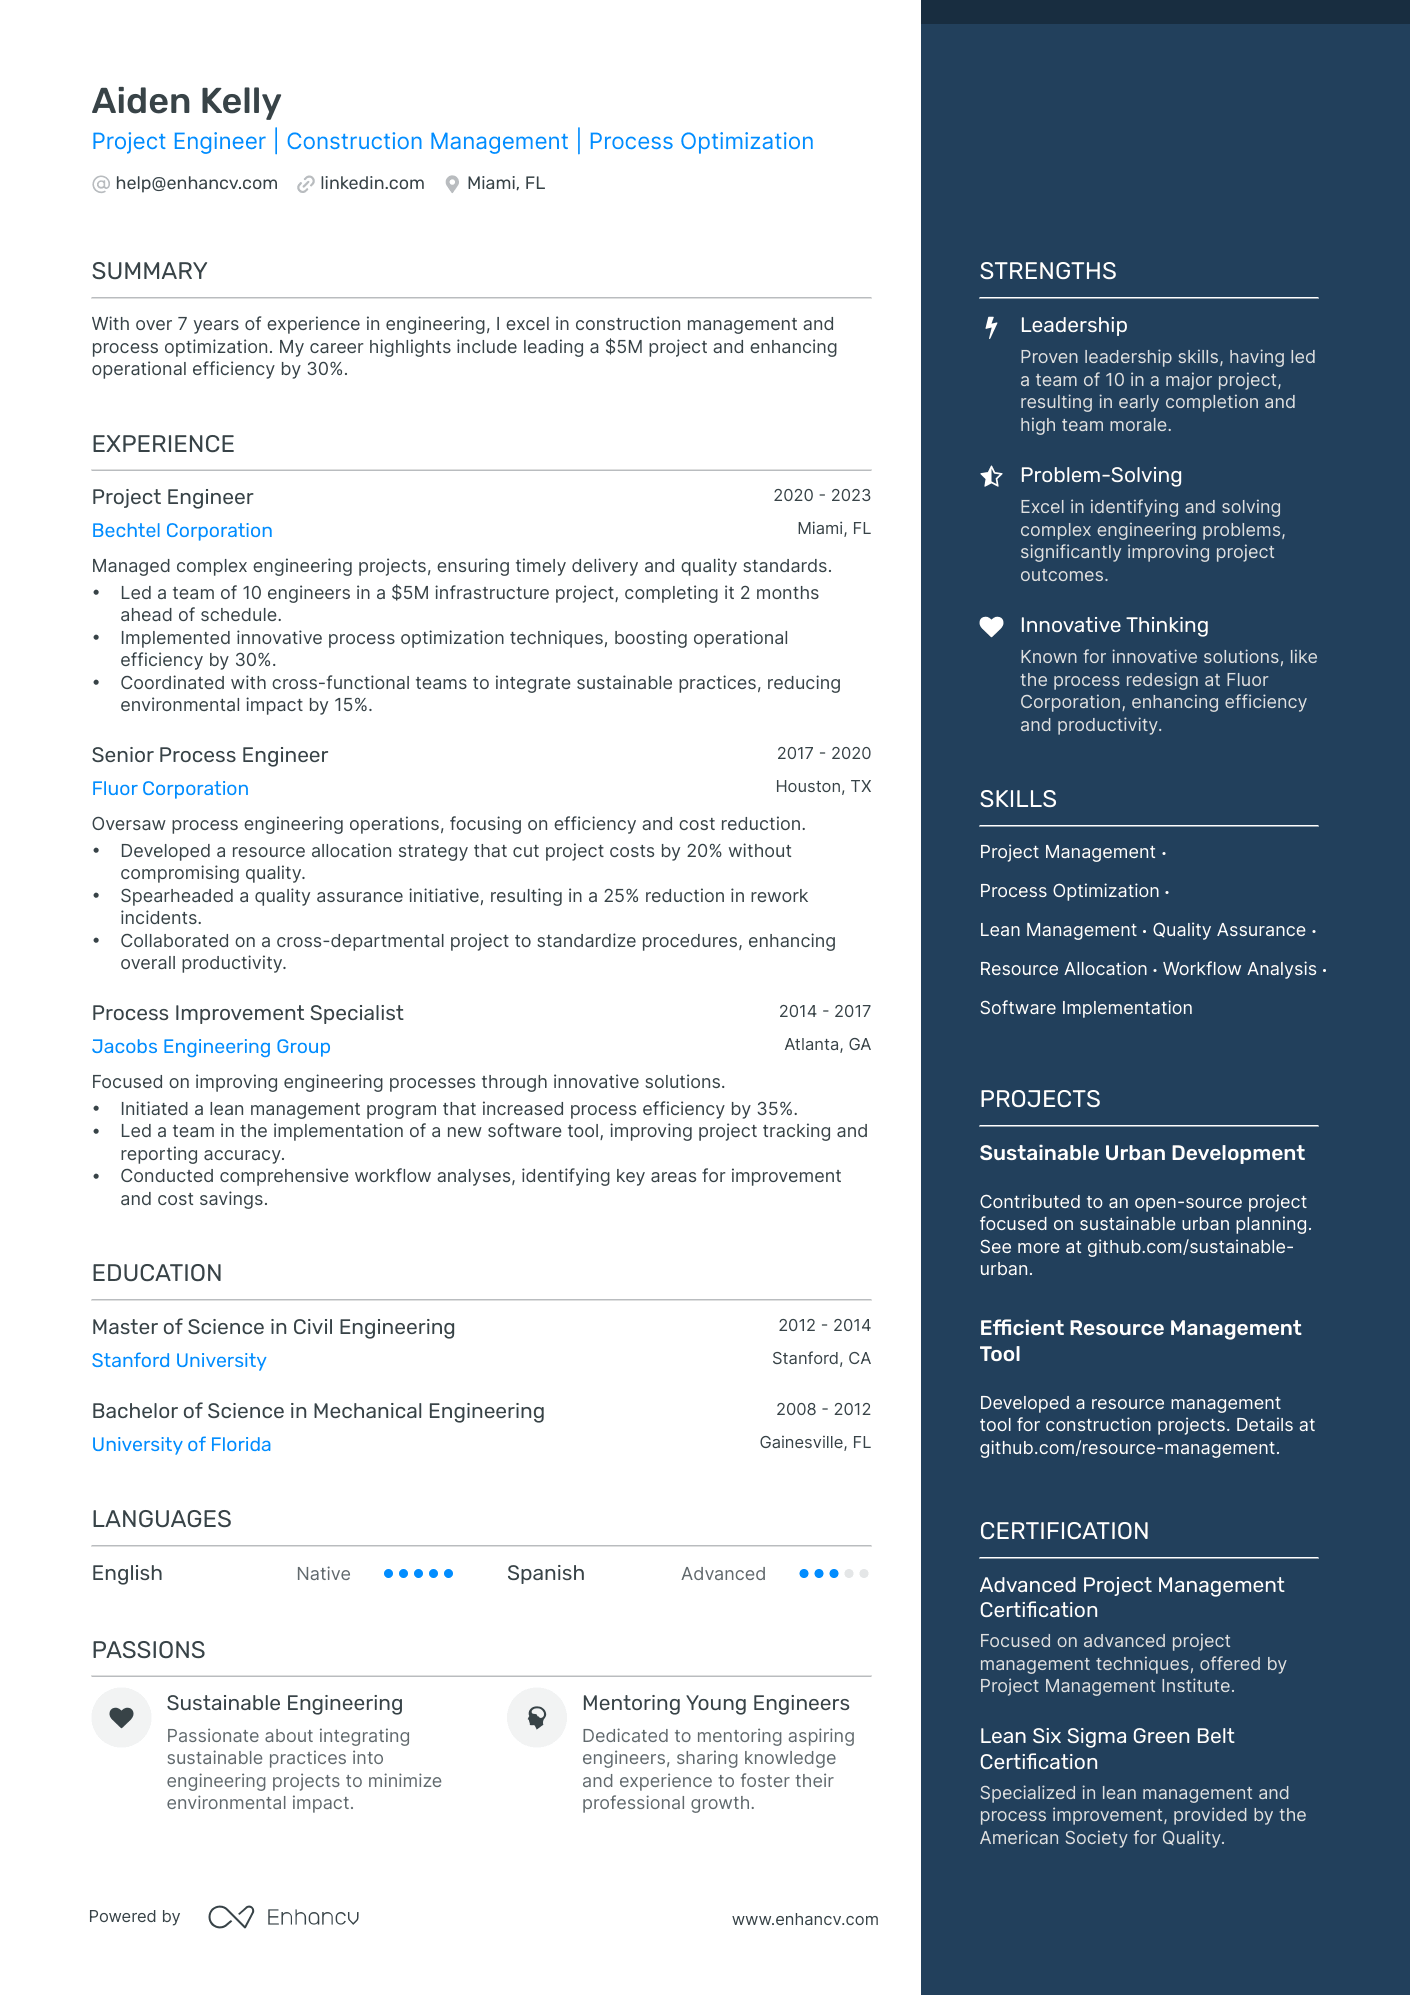 Project Engineer resume example